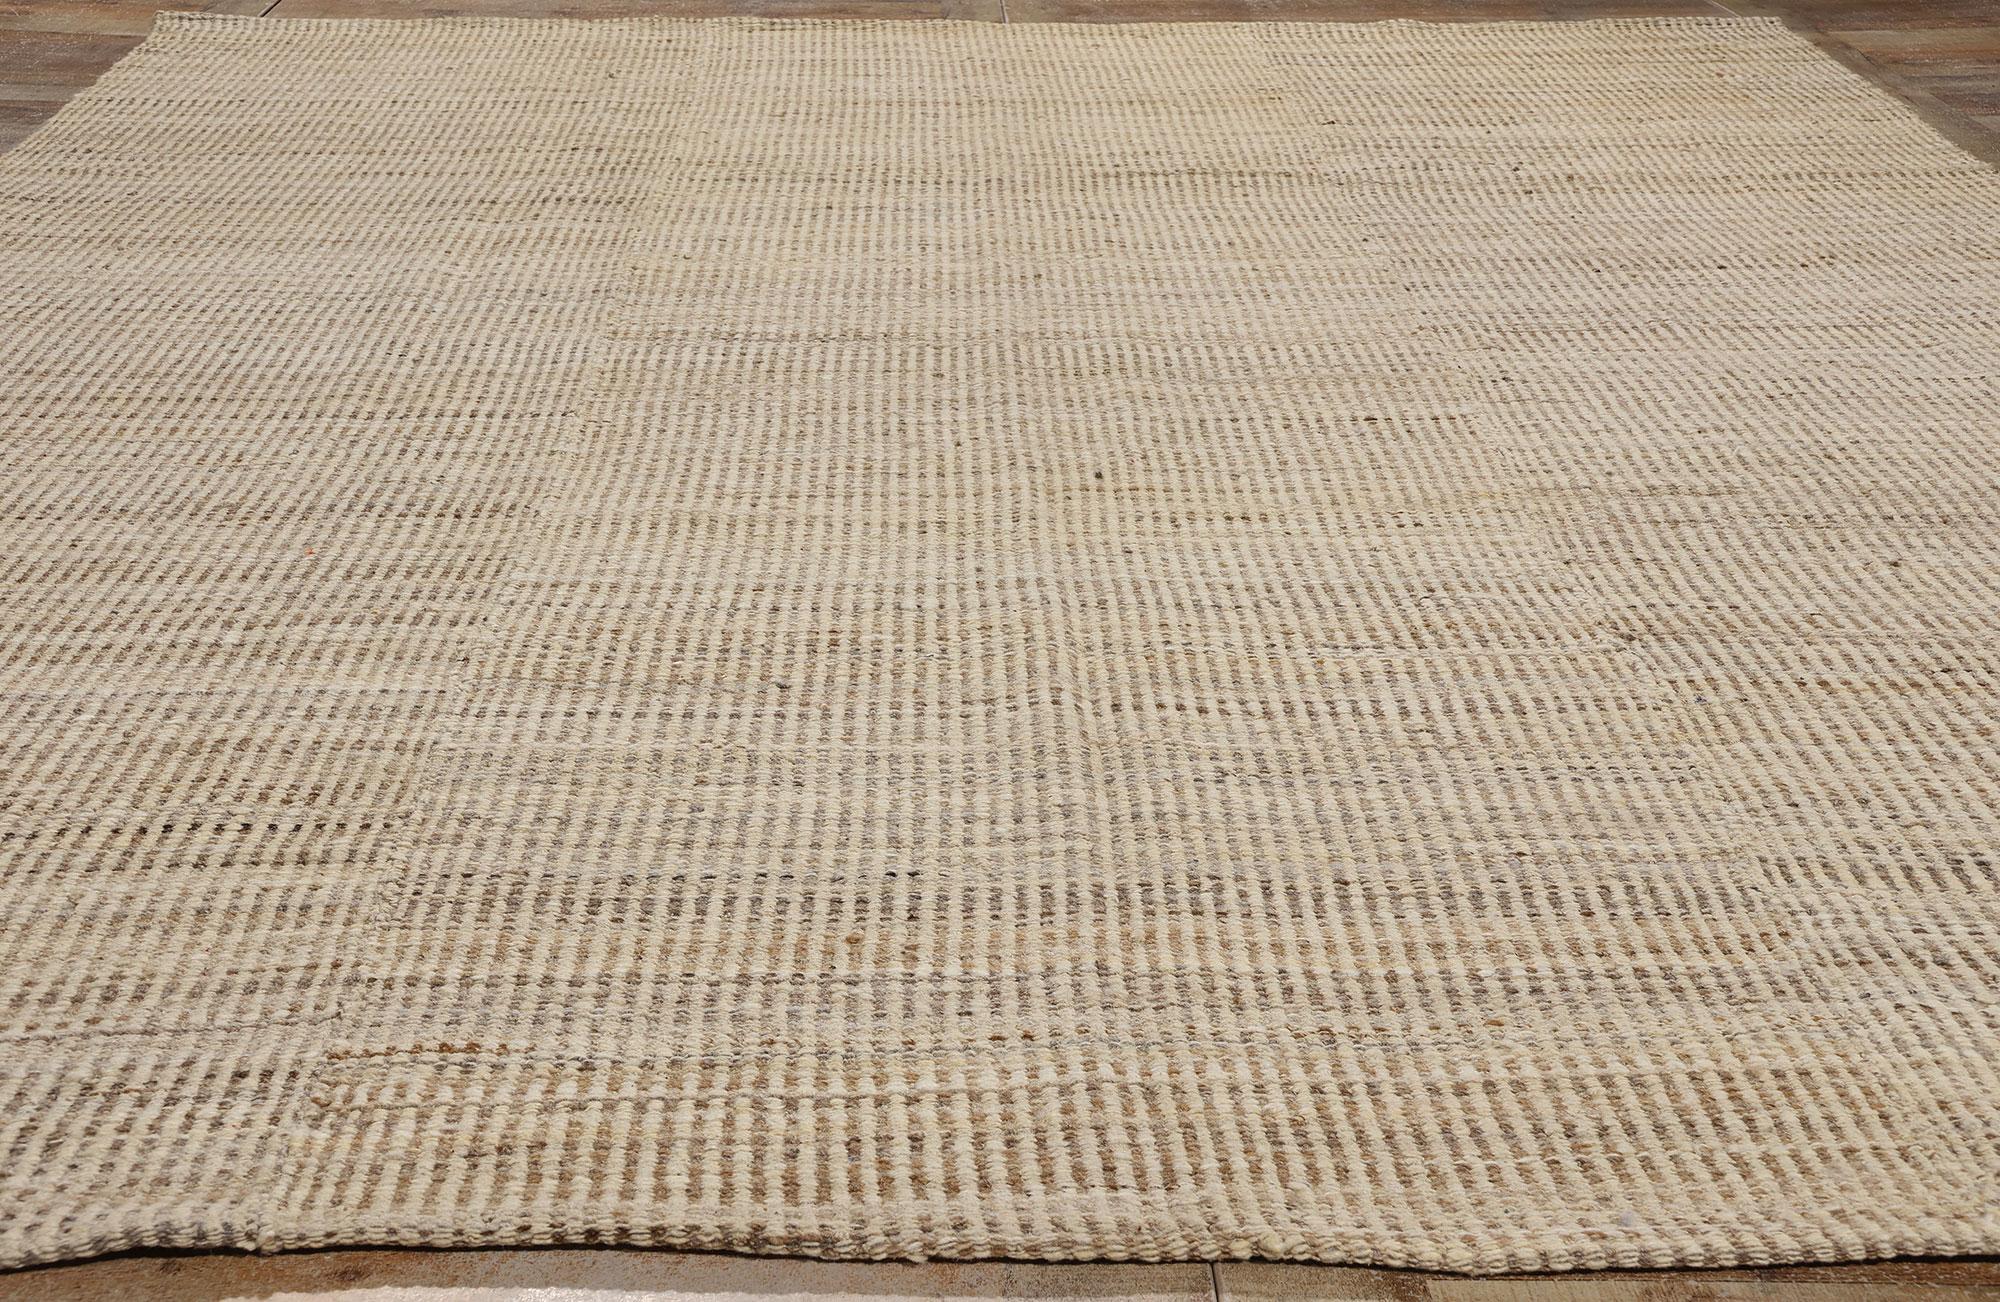 Earth-Tone Japandi Kilim Area Rug, Modern Serenity Meets Zen Tranquility In New Condition For Sale In Dallas, TX